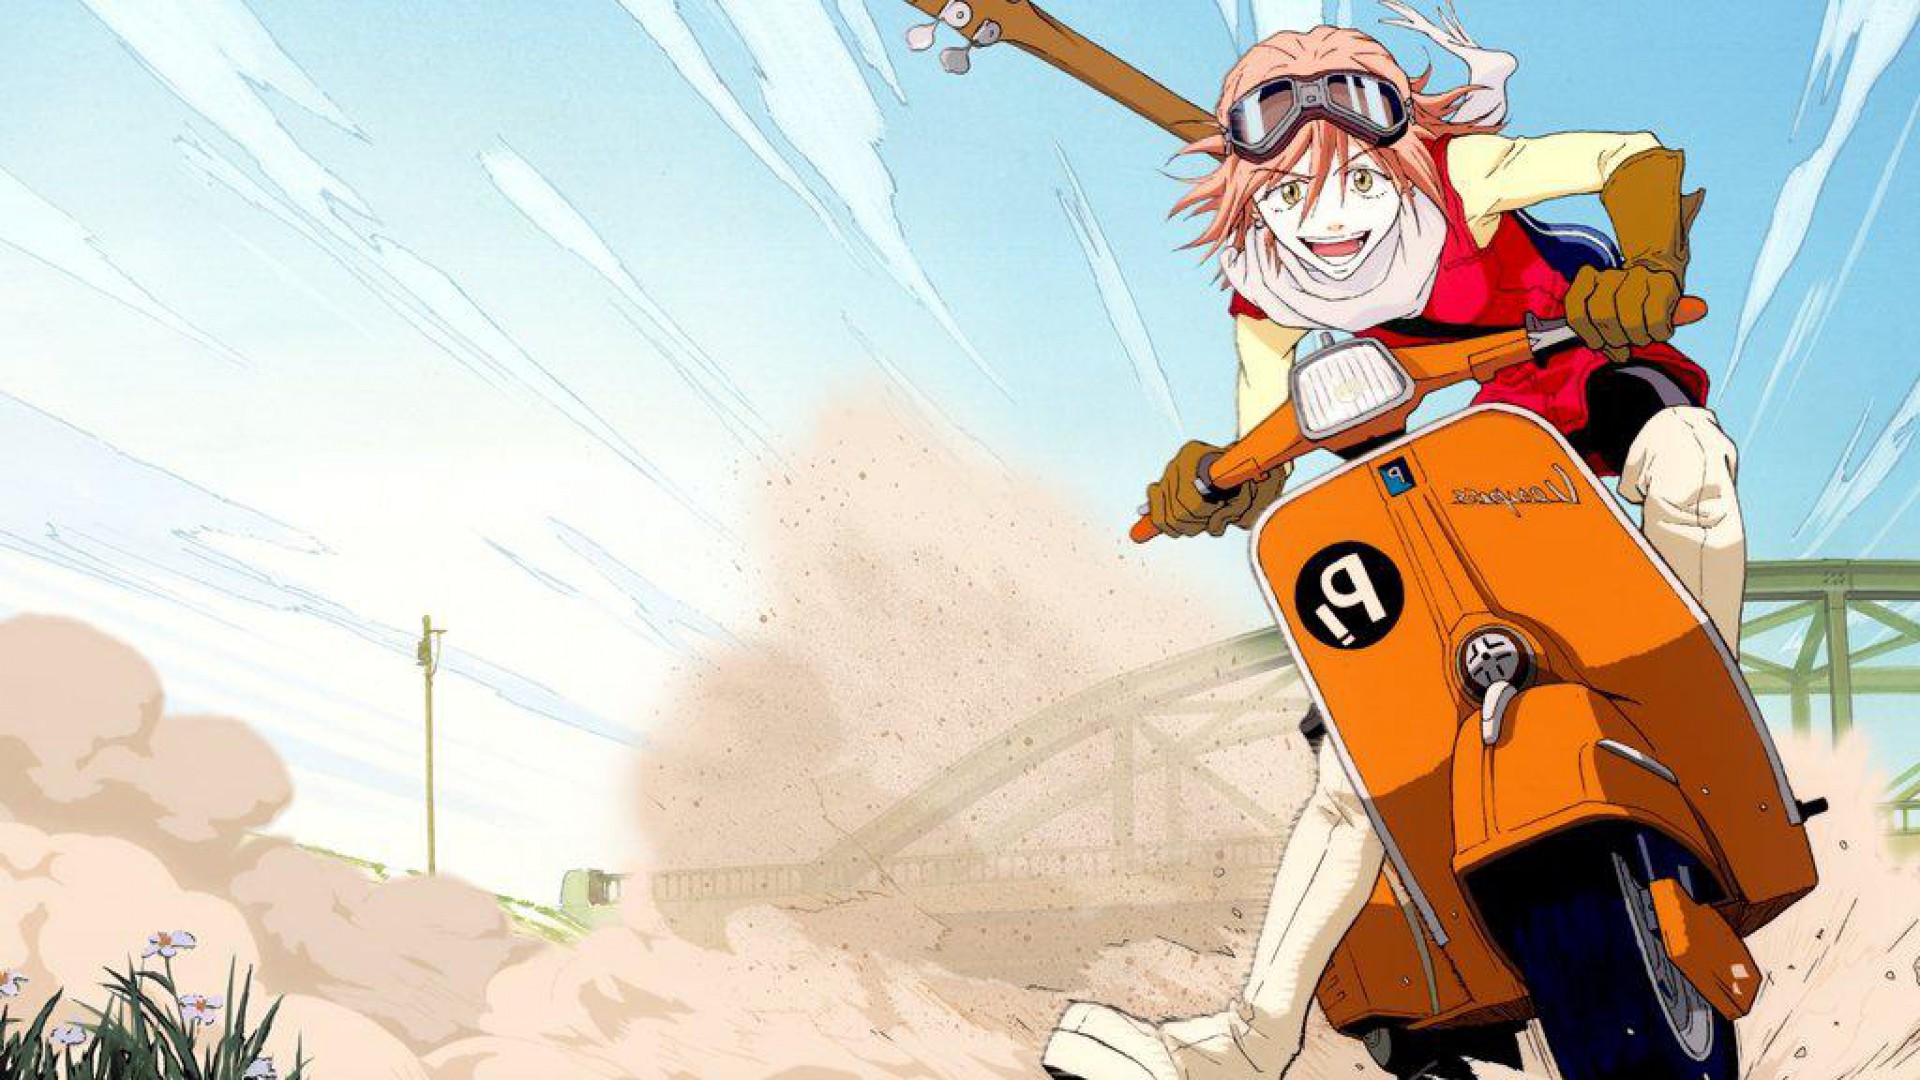 HD Quality Wallpaper | Collection: Anime, 1920x1080 FLCL